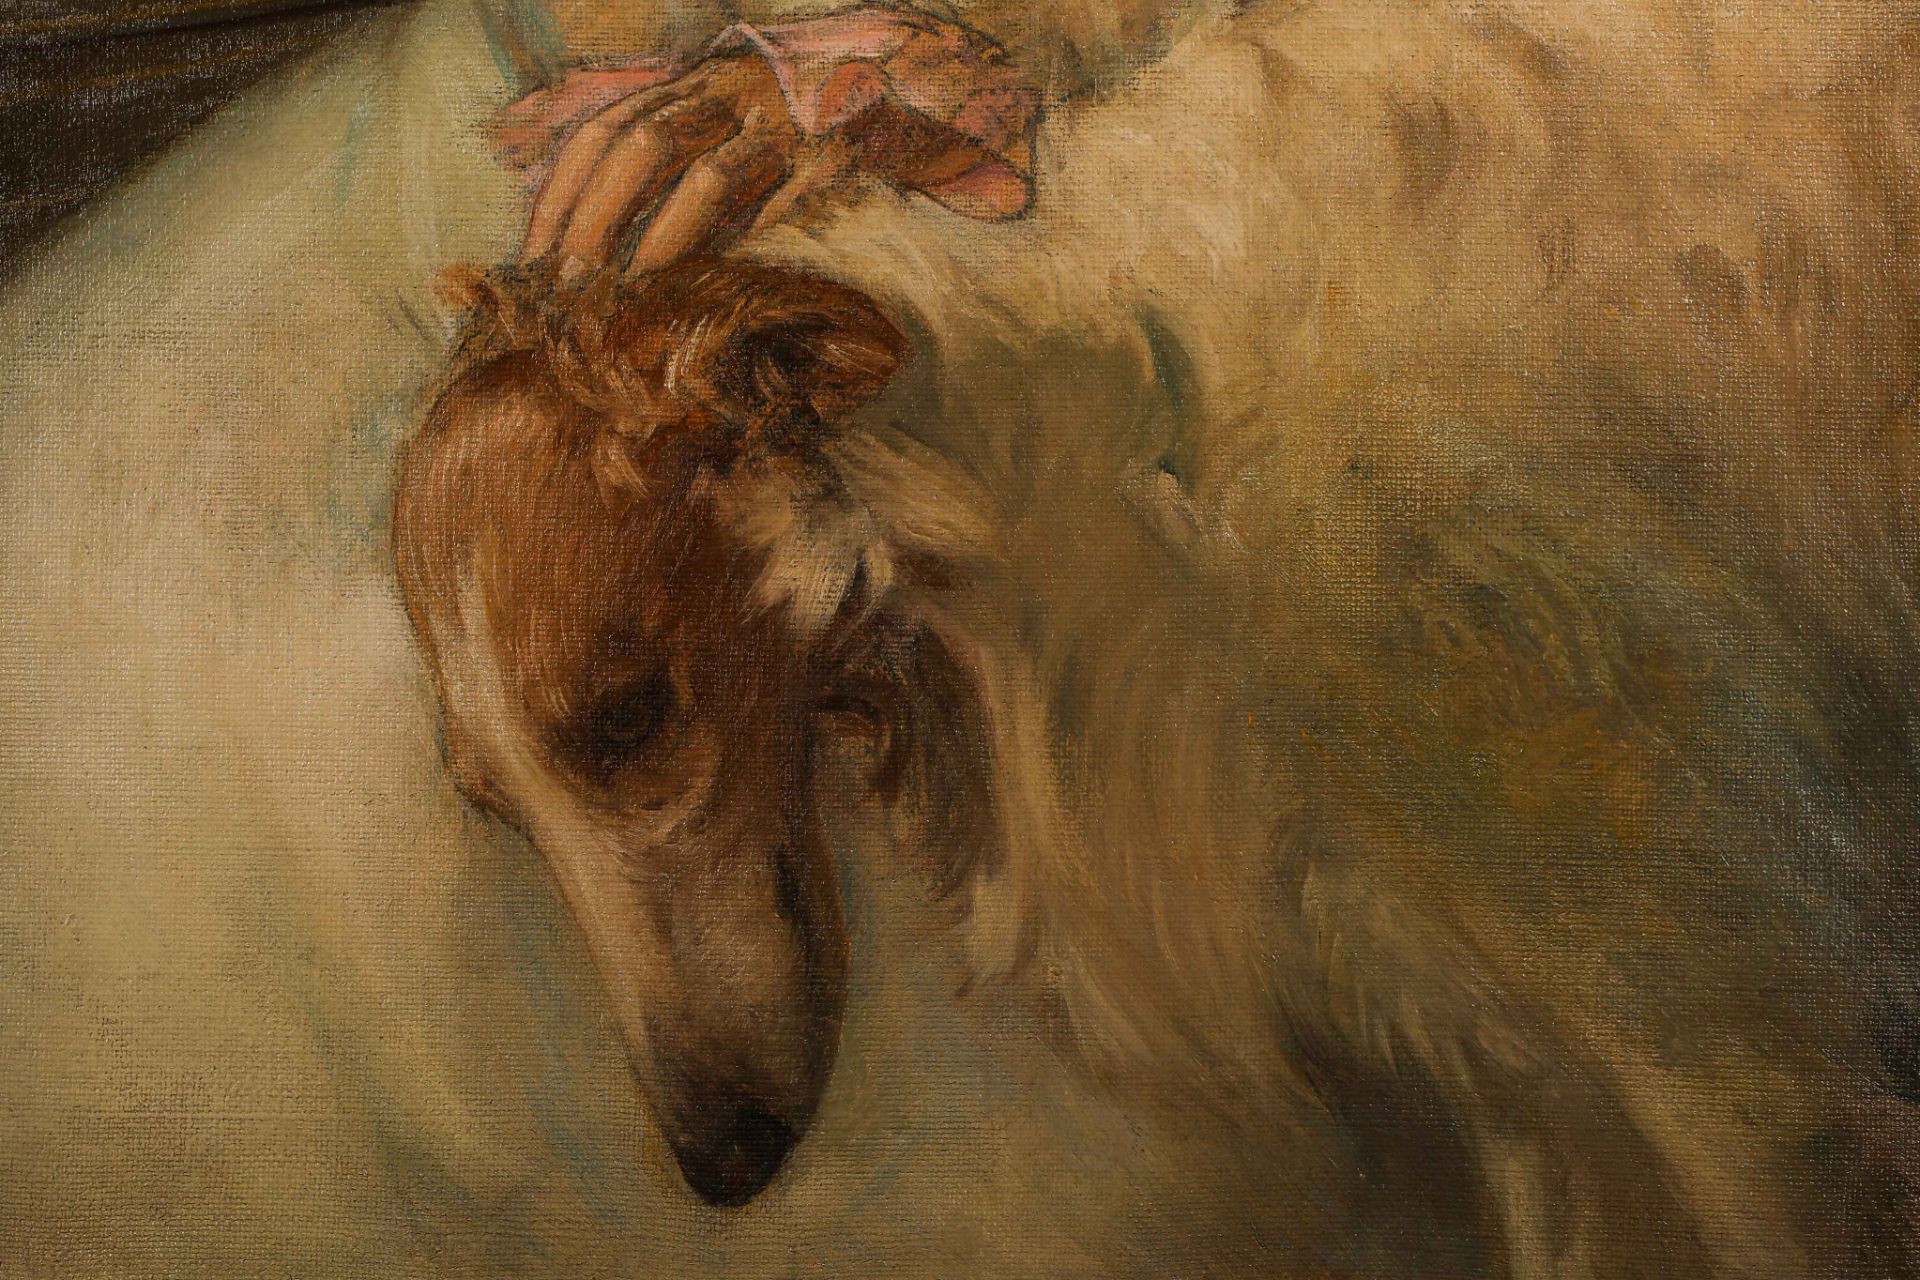 Women and Her Dog
Oil on canvas
（1876-1966，USA，by Joseph Mortimer Lichtenauer Jr） - Image 6 of 9